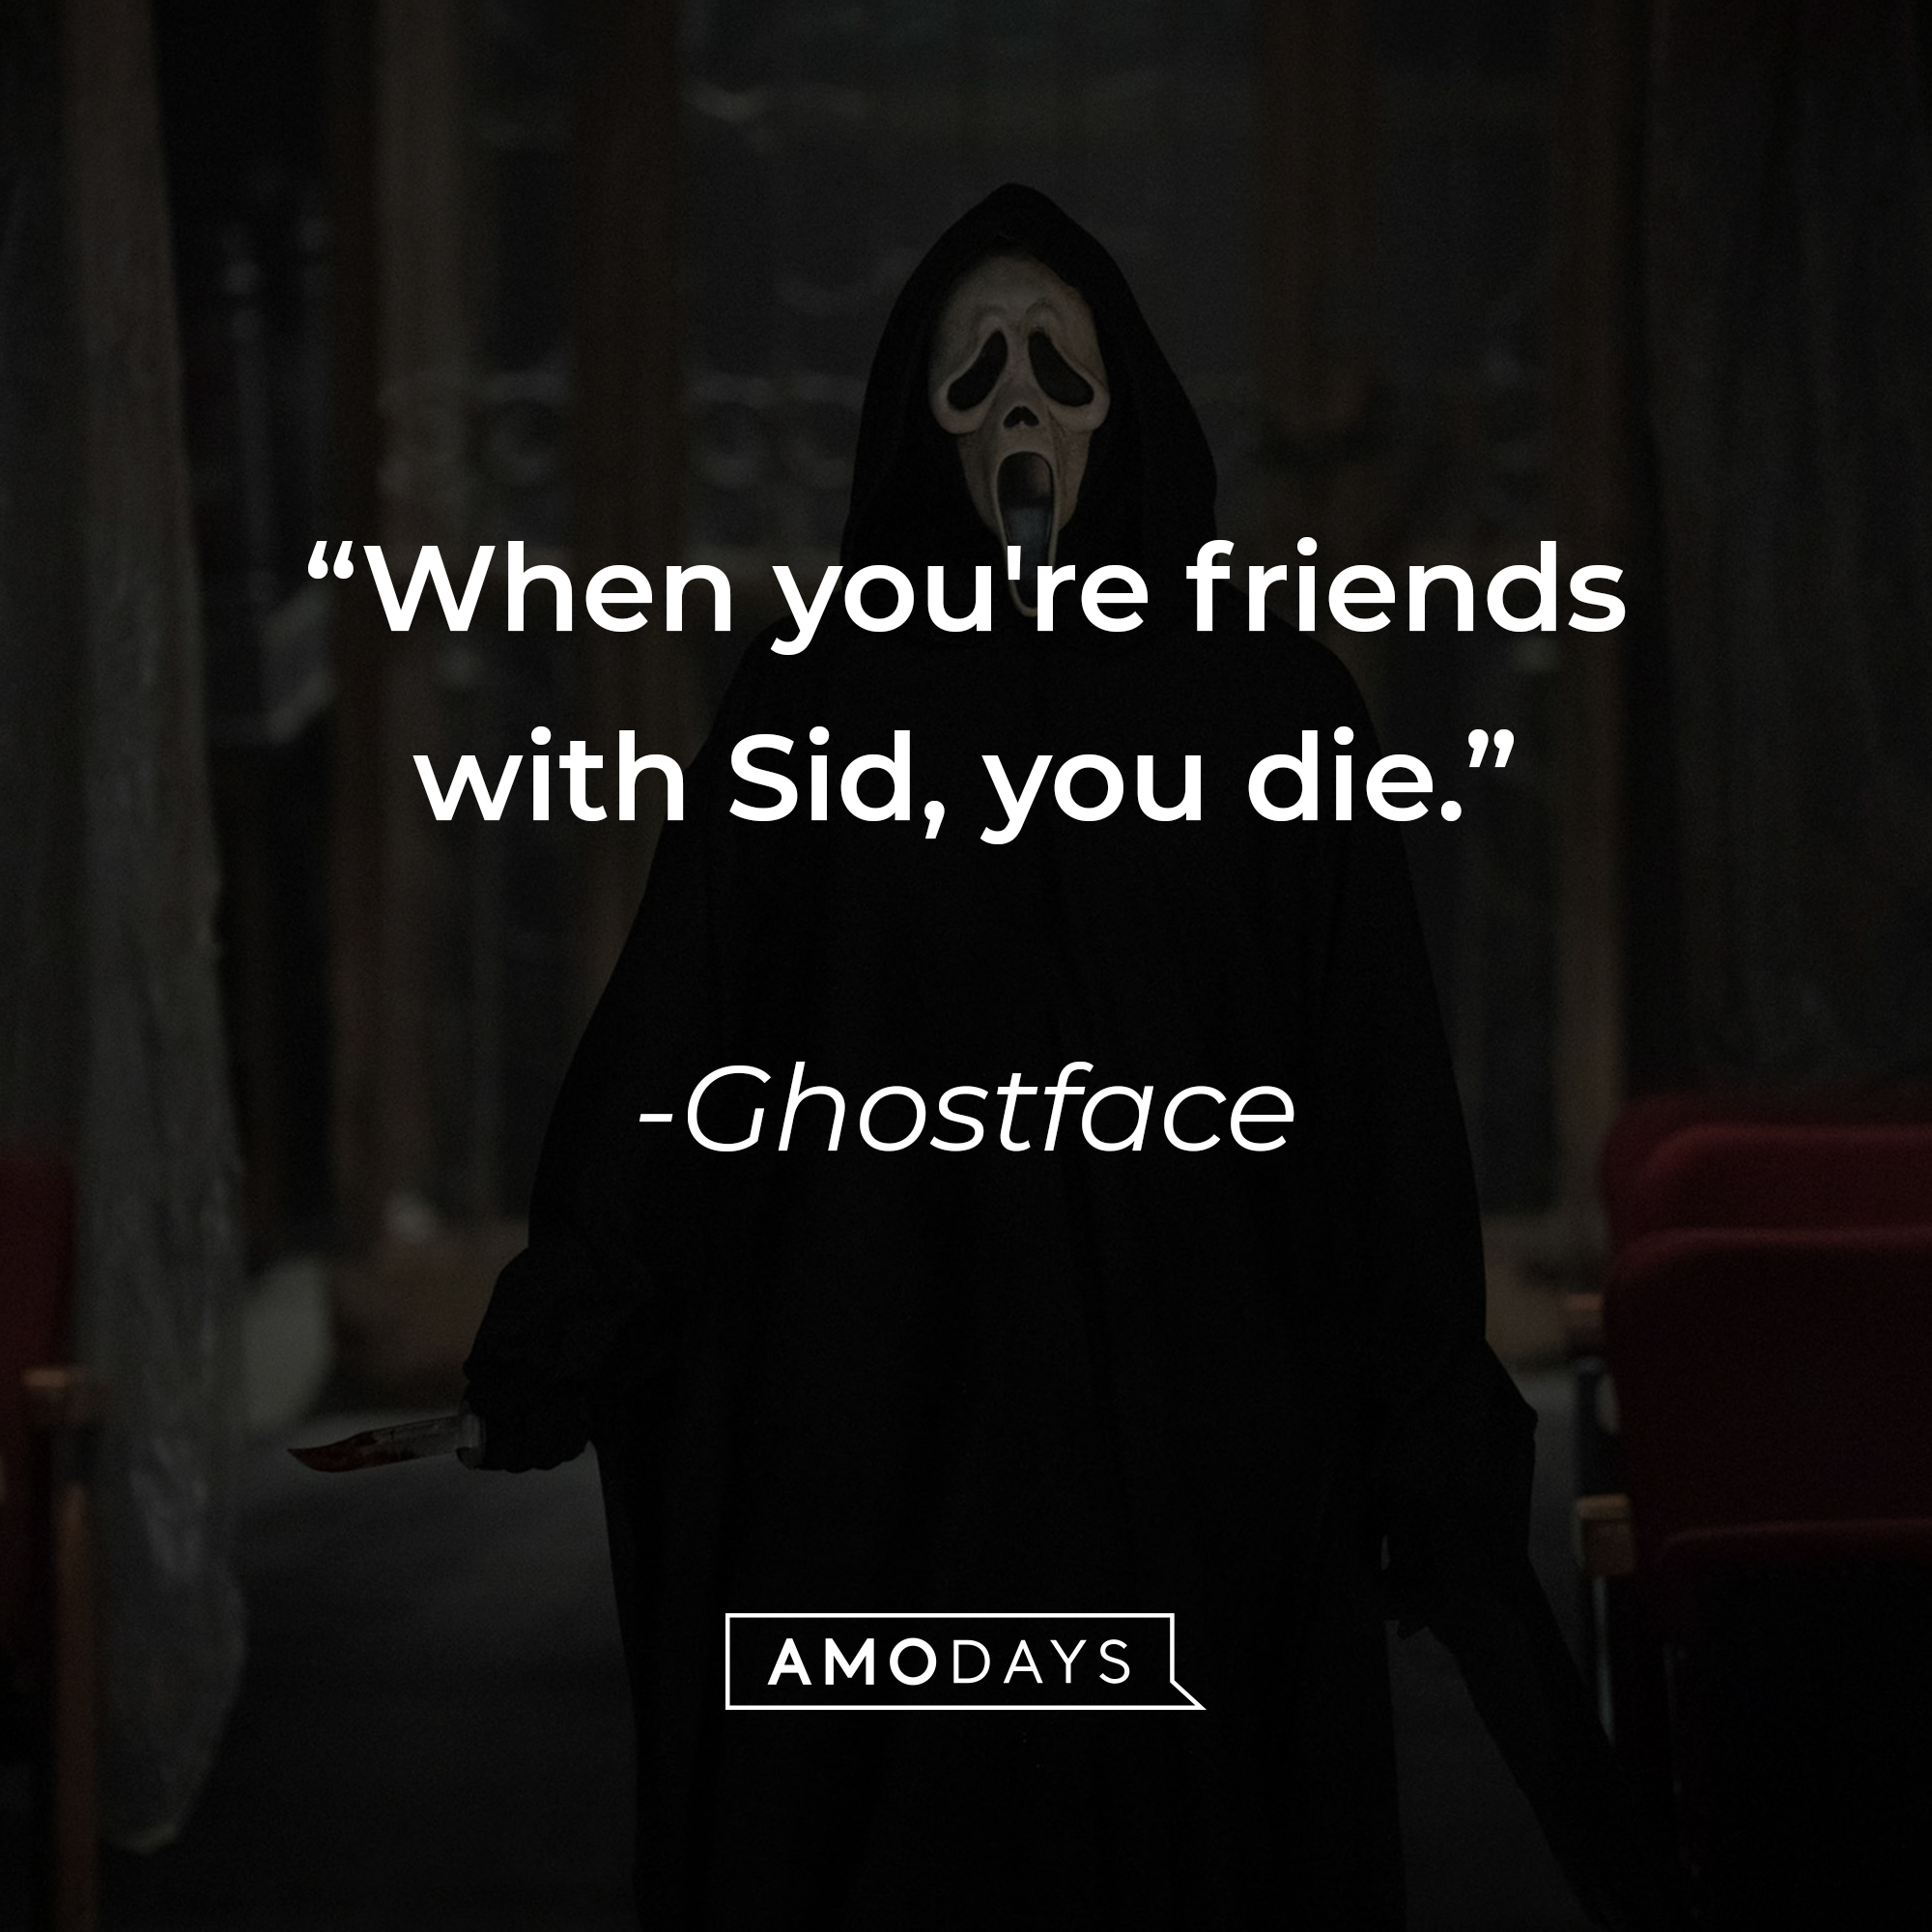 Ghostface with his quote, "When you're friends with Sid, you die." | Source: Facebook/ScreamMovies